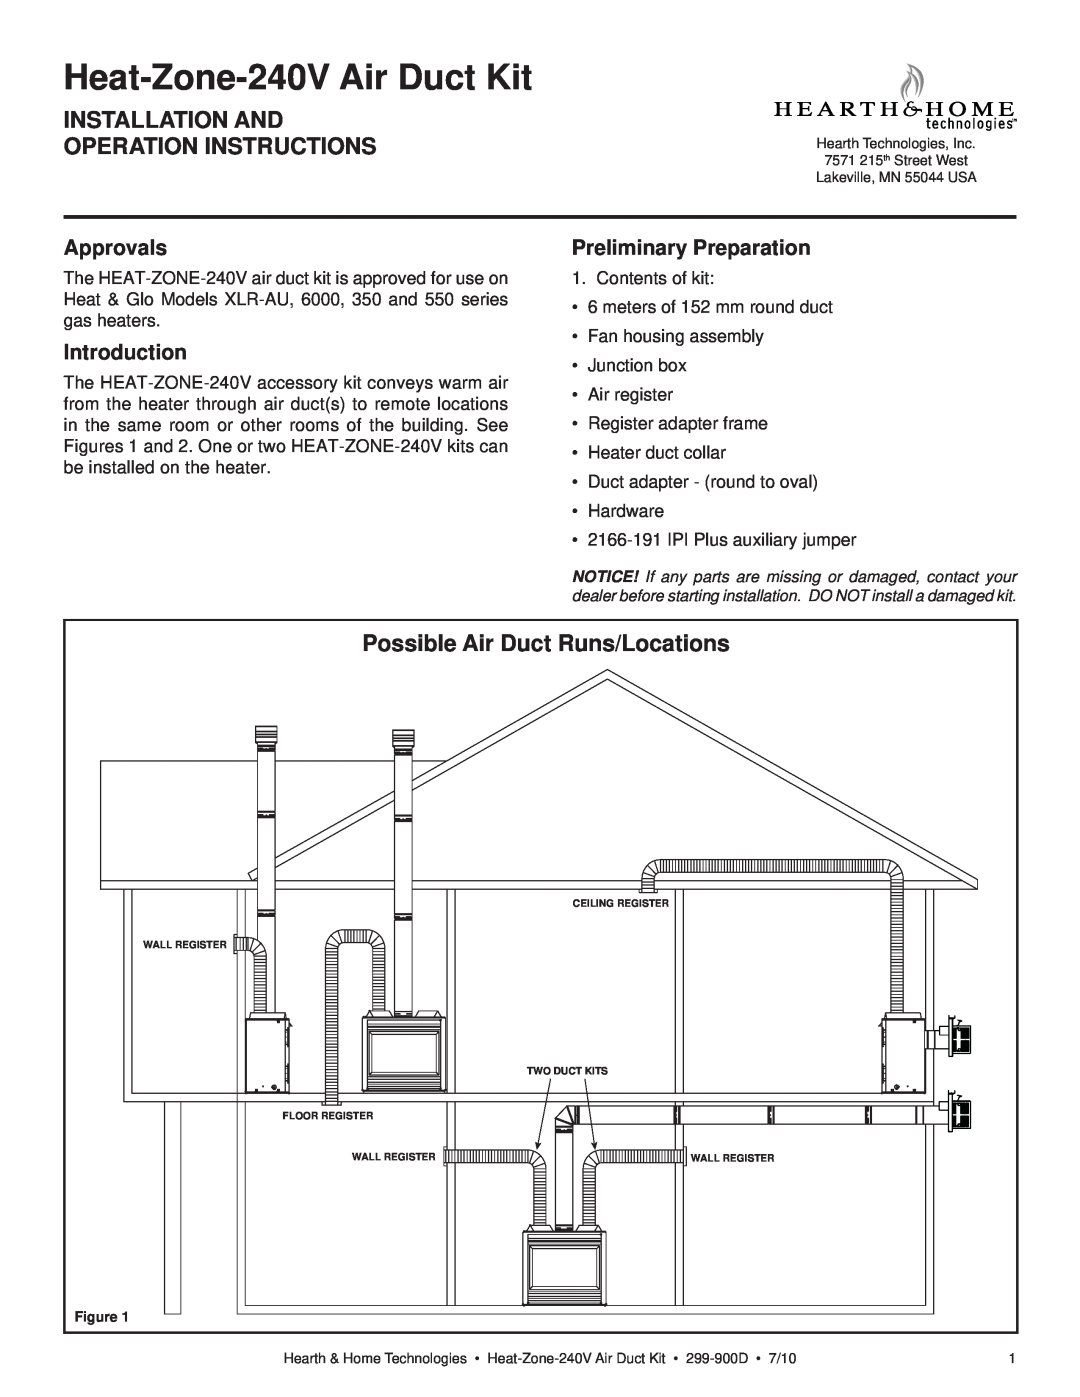 Hearth and Home Technologies 299-900D manual Installation And Operation Instructions, Possible Air Duct Runs/Locations 